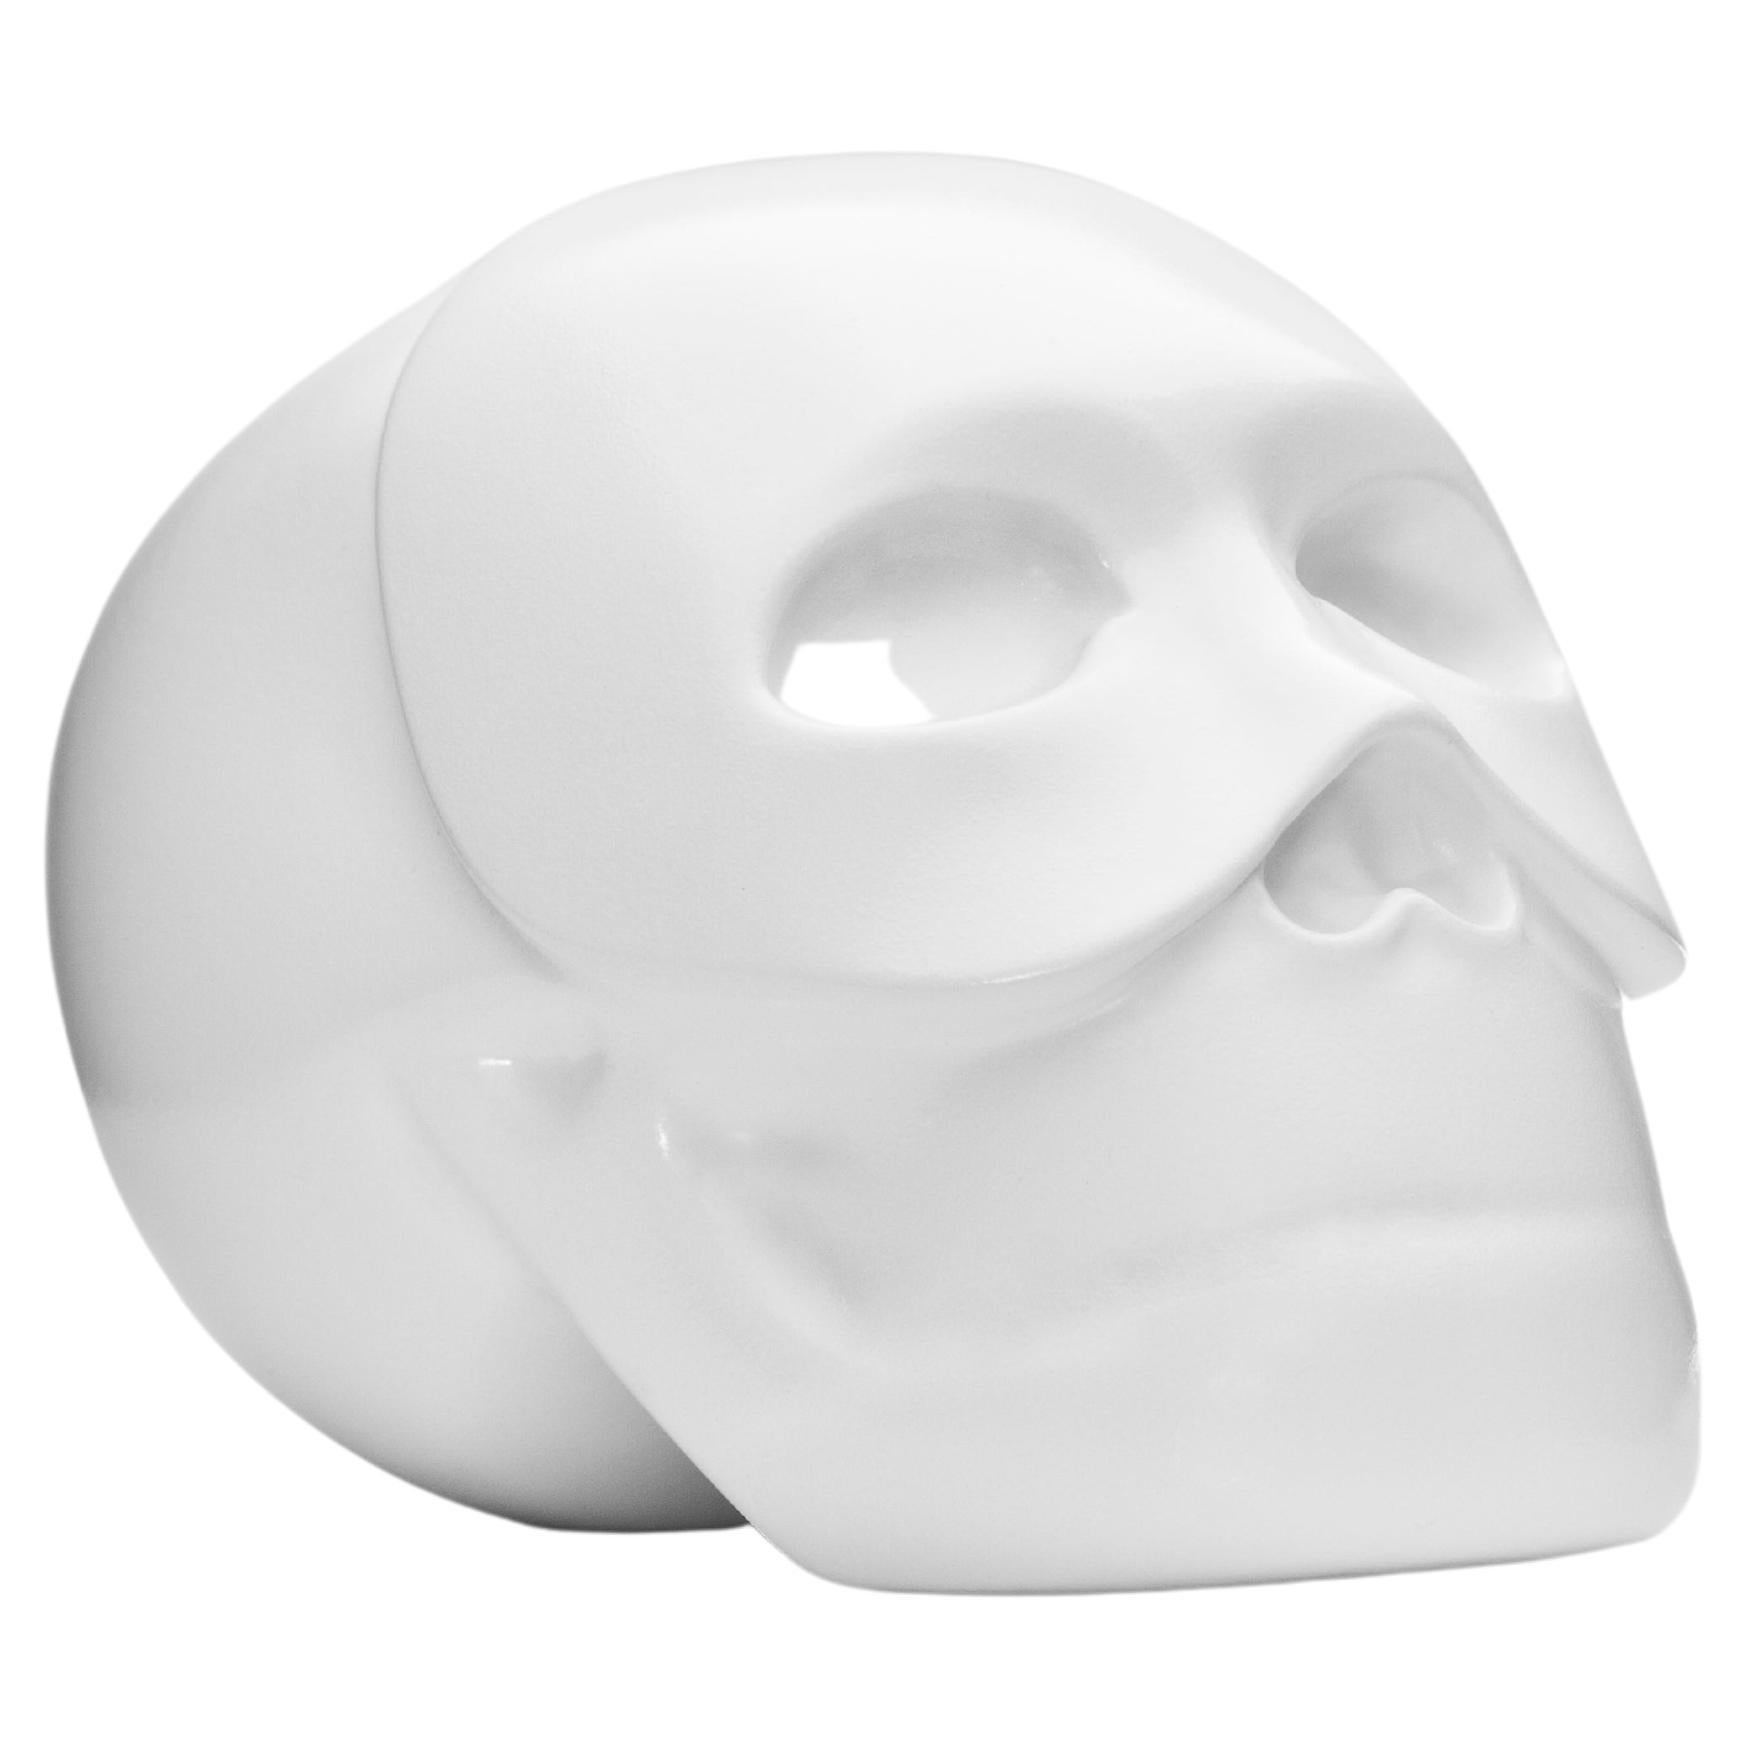 THE SKULL "My Essence"  hand-painted resin sculpture by Gio Pagani For Sale